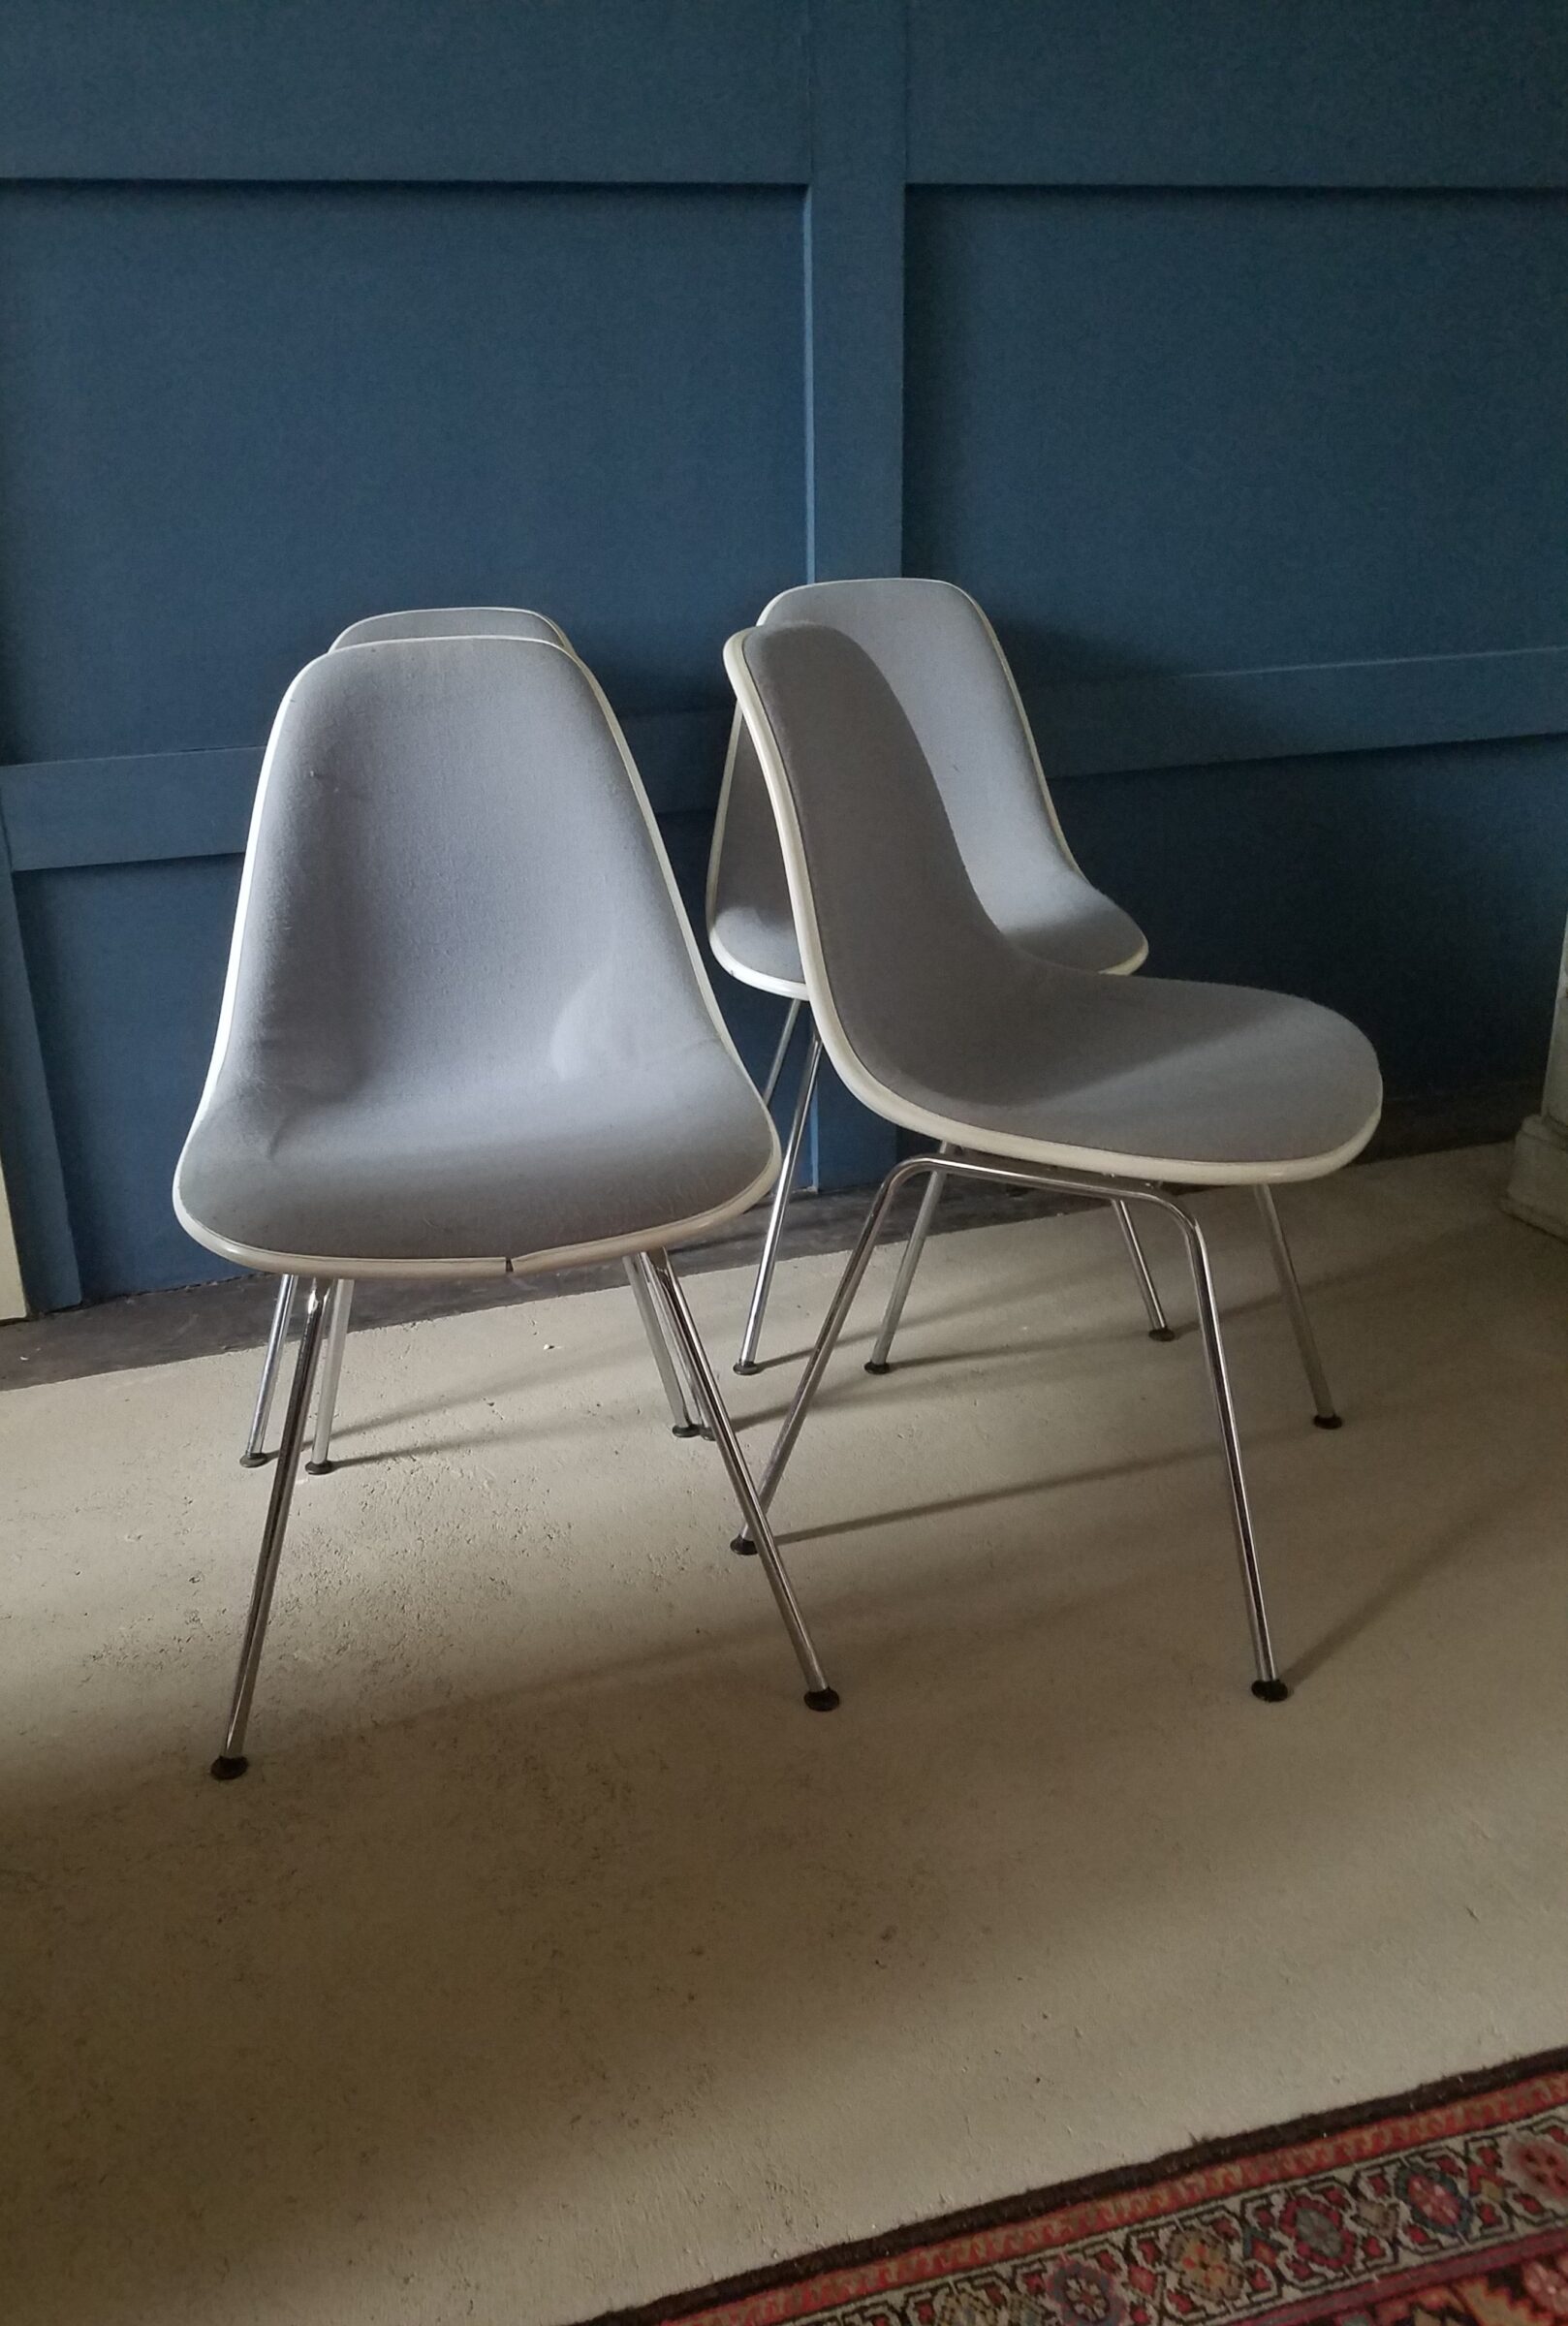 Eight, Charles Eames Design ‘DSX’ Chairs